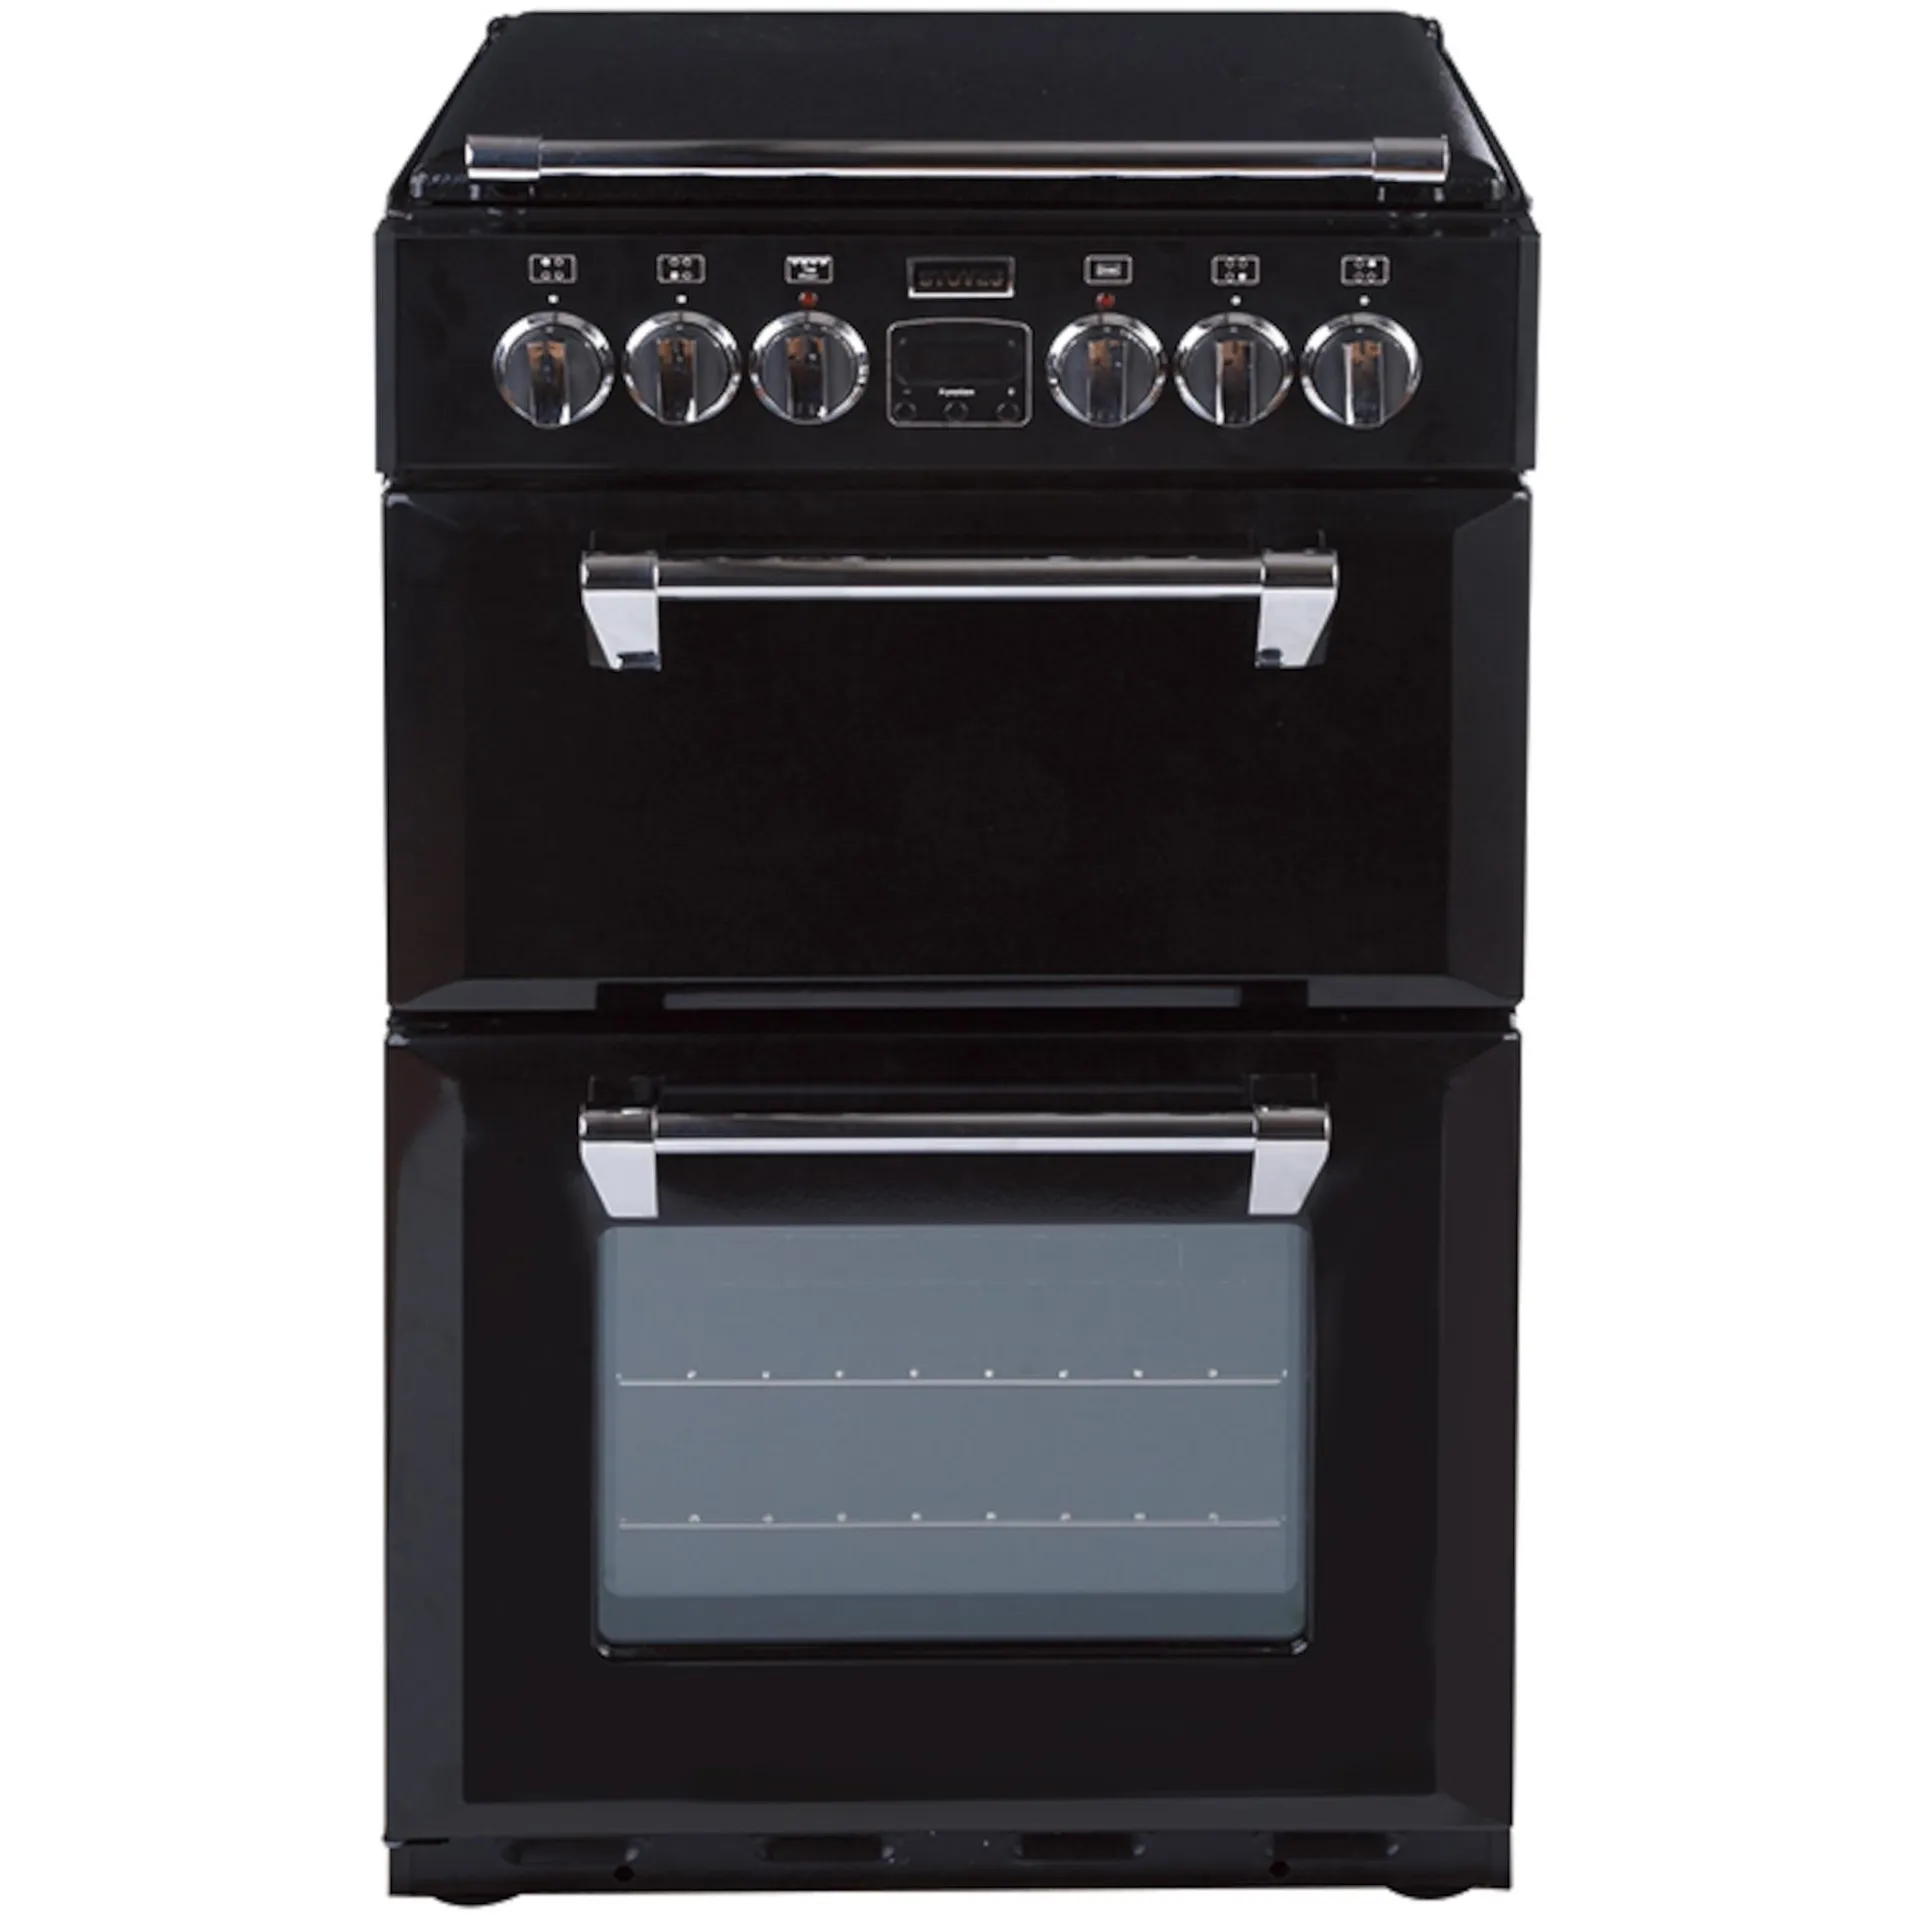 Stoves Richmond 550E Electric Cooker with Ceramic Hob